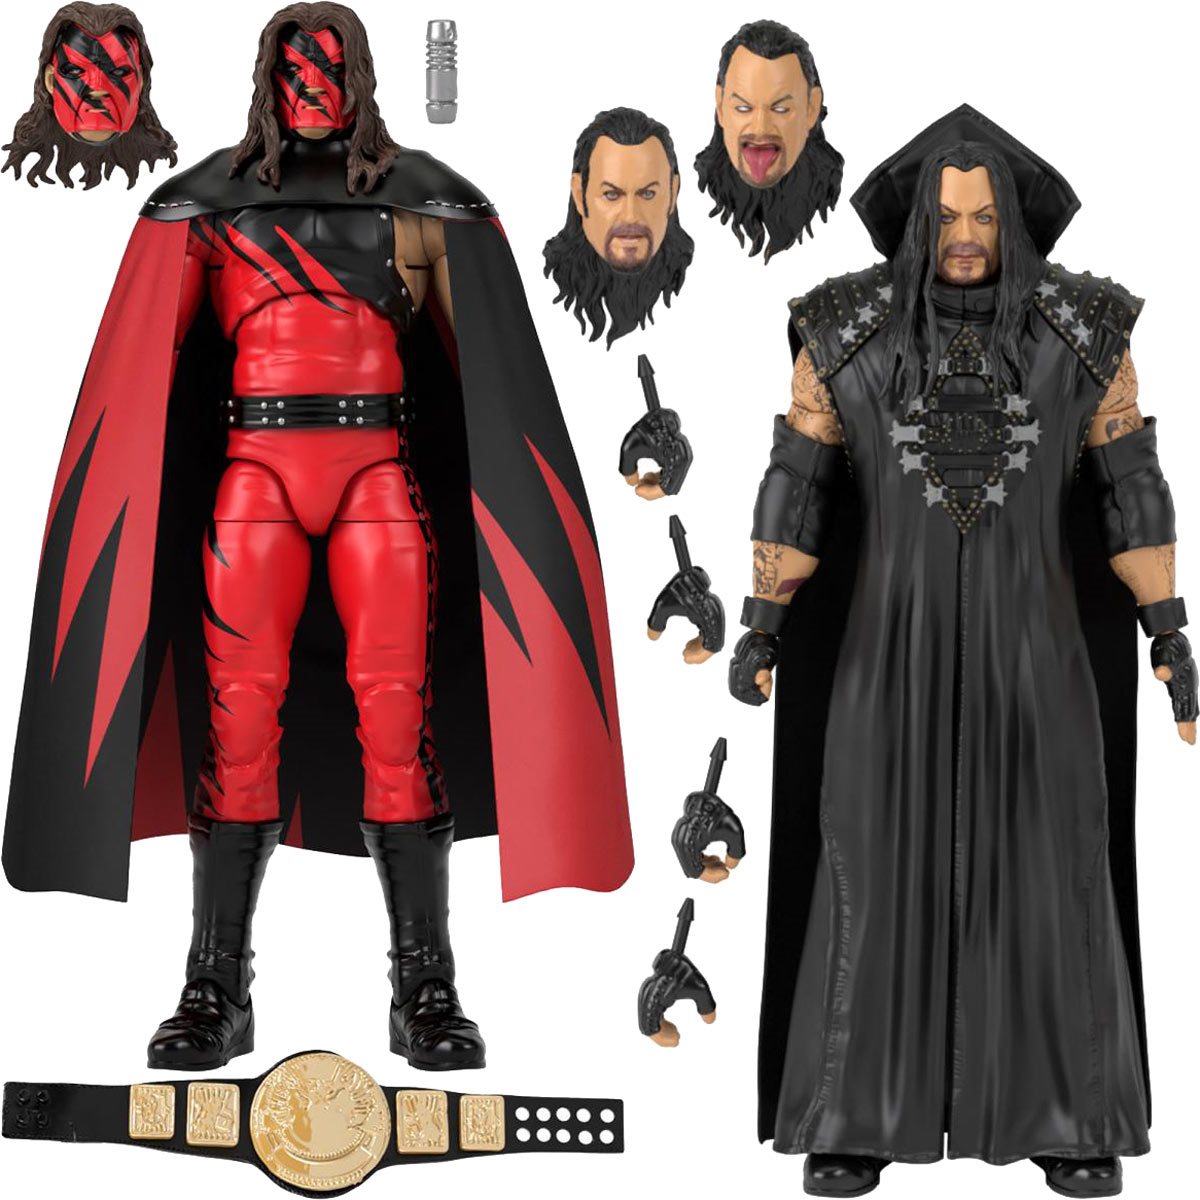 Wwe Action Figures Ultimate Edition | tunersread.com